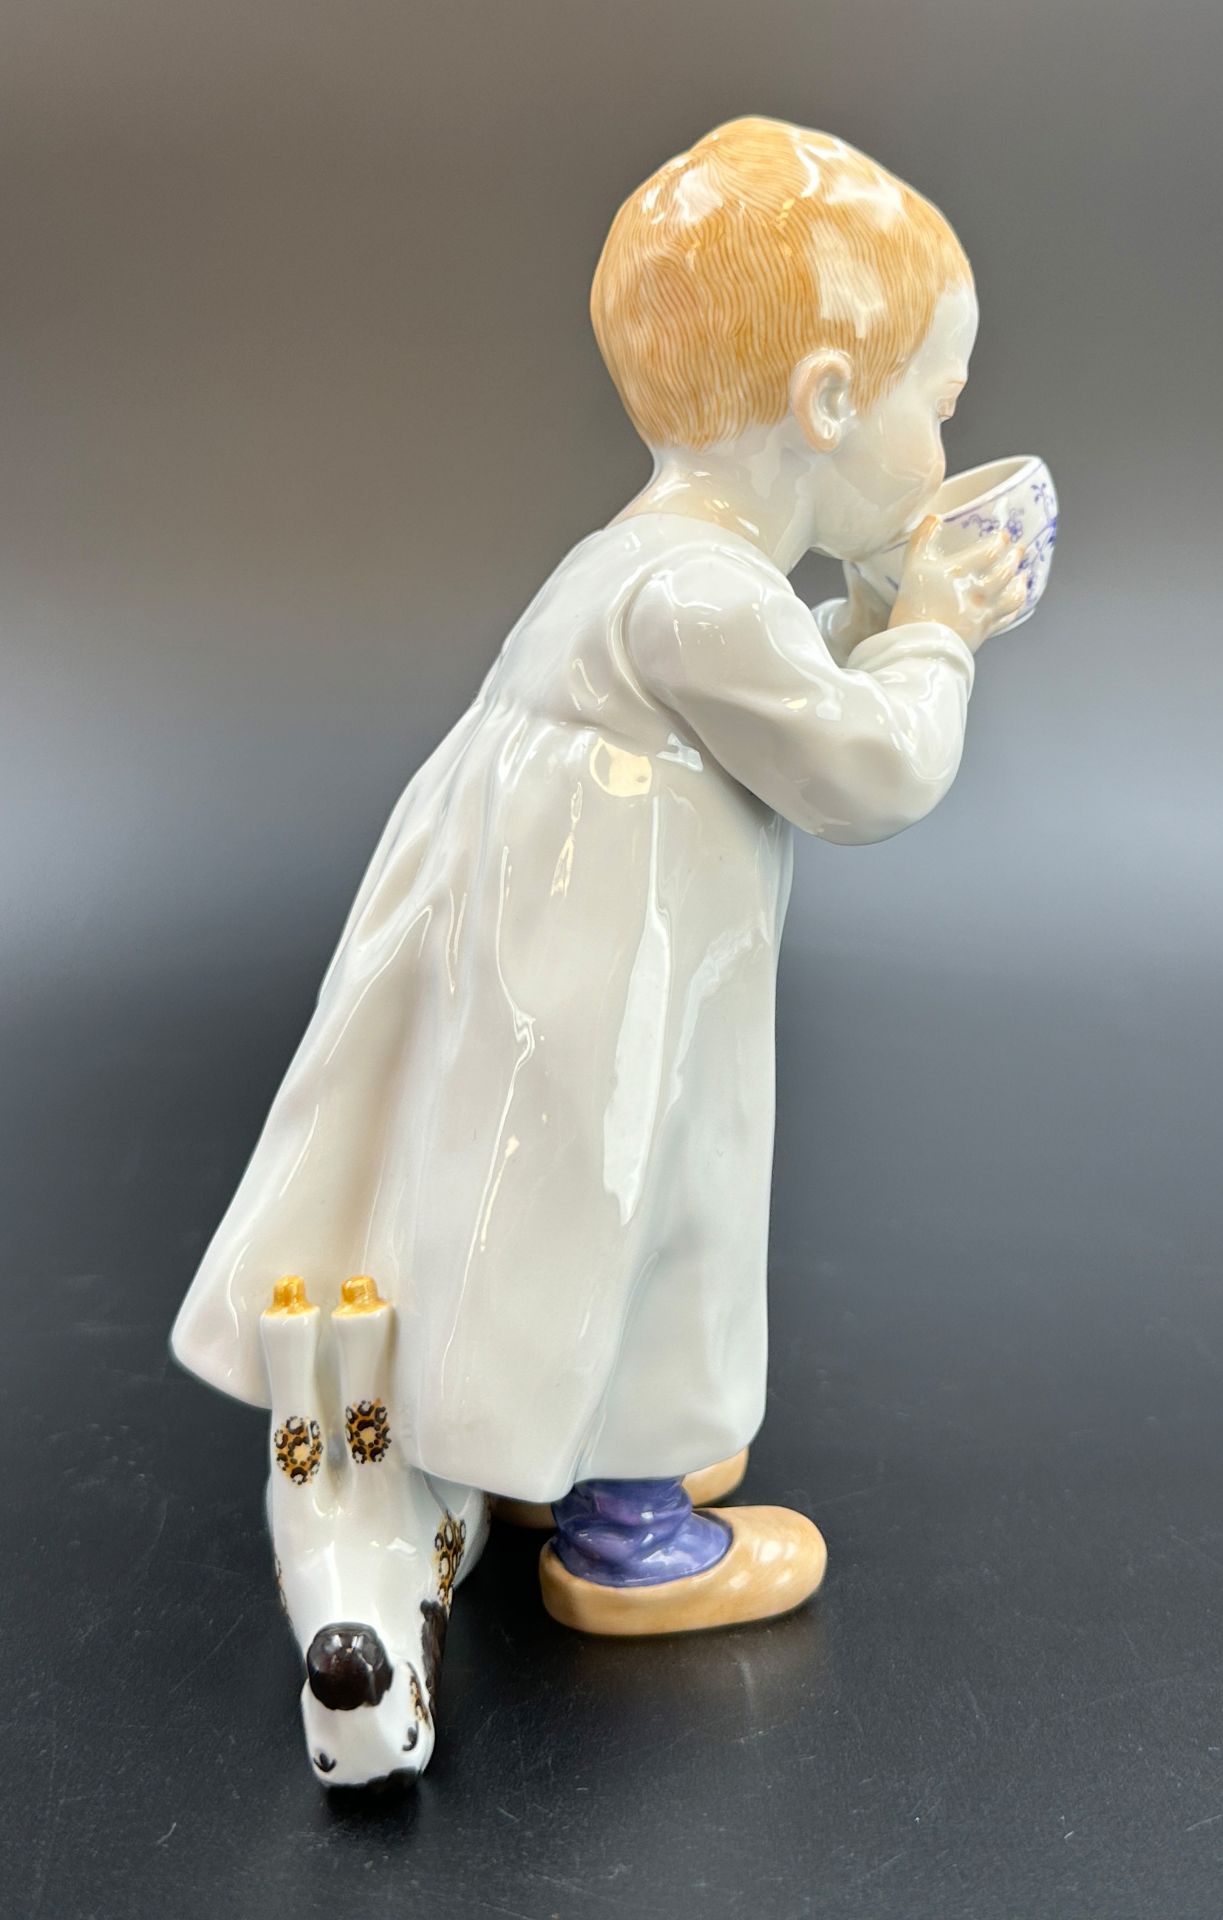 Hentschelkind. MEISSEN. "Child with cup". 1st choice. 1980s. - Image 7 of 11